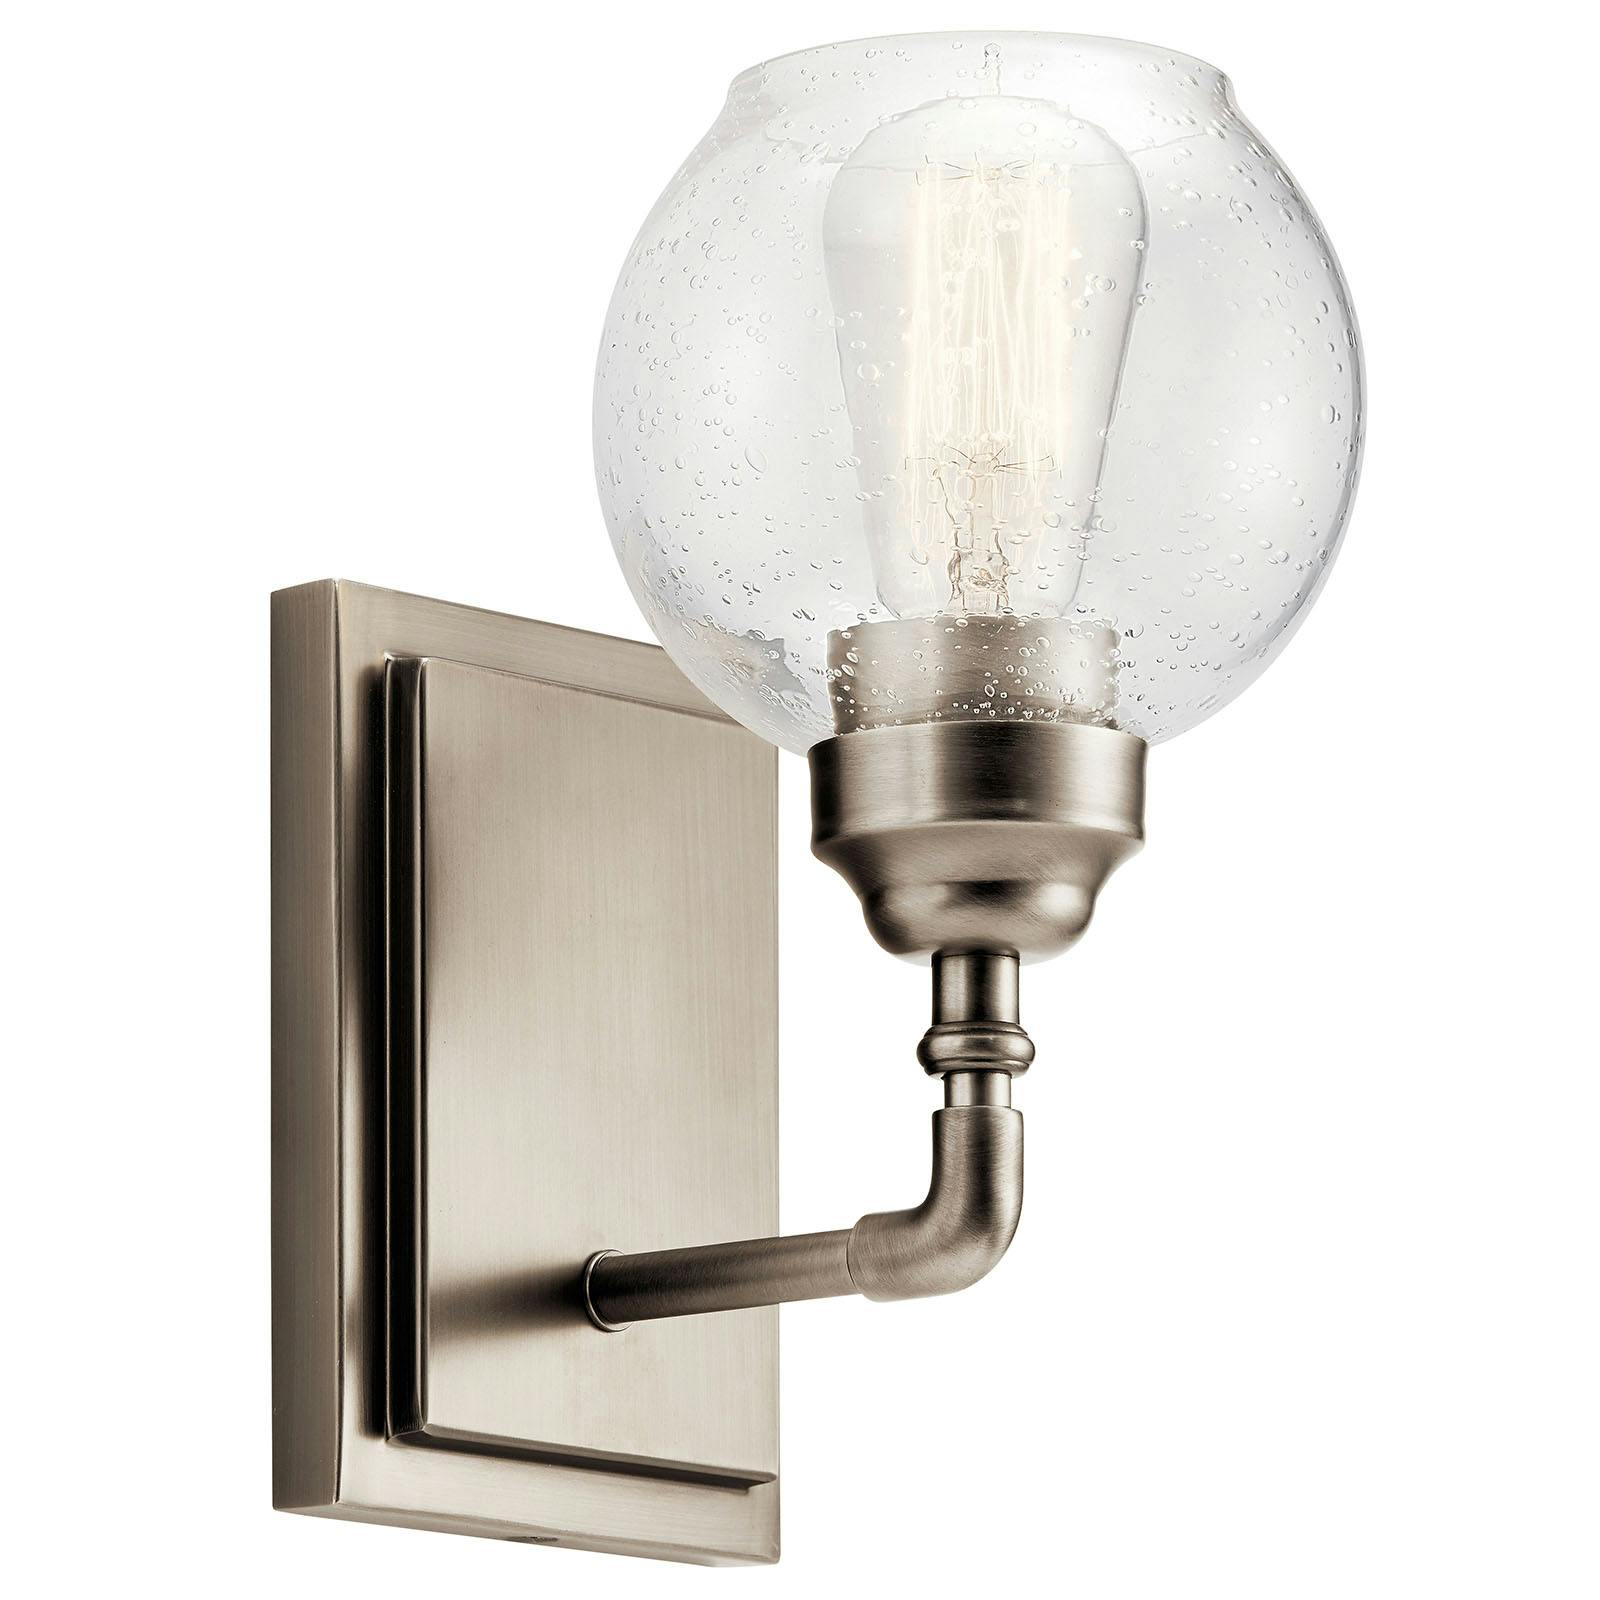 Niles 1 Light Wall Sconce Antique Pewter on a white background